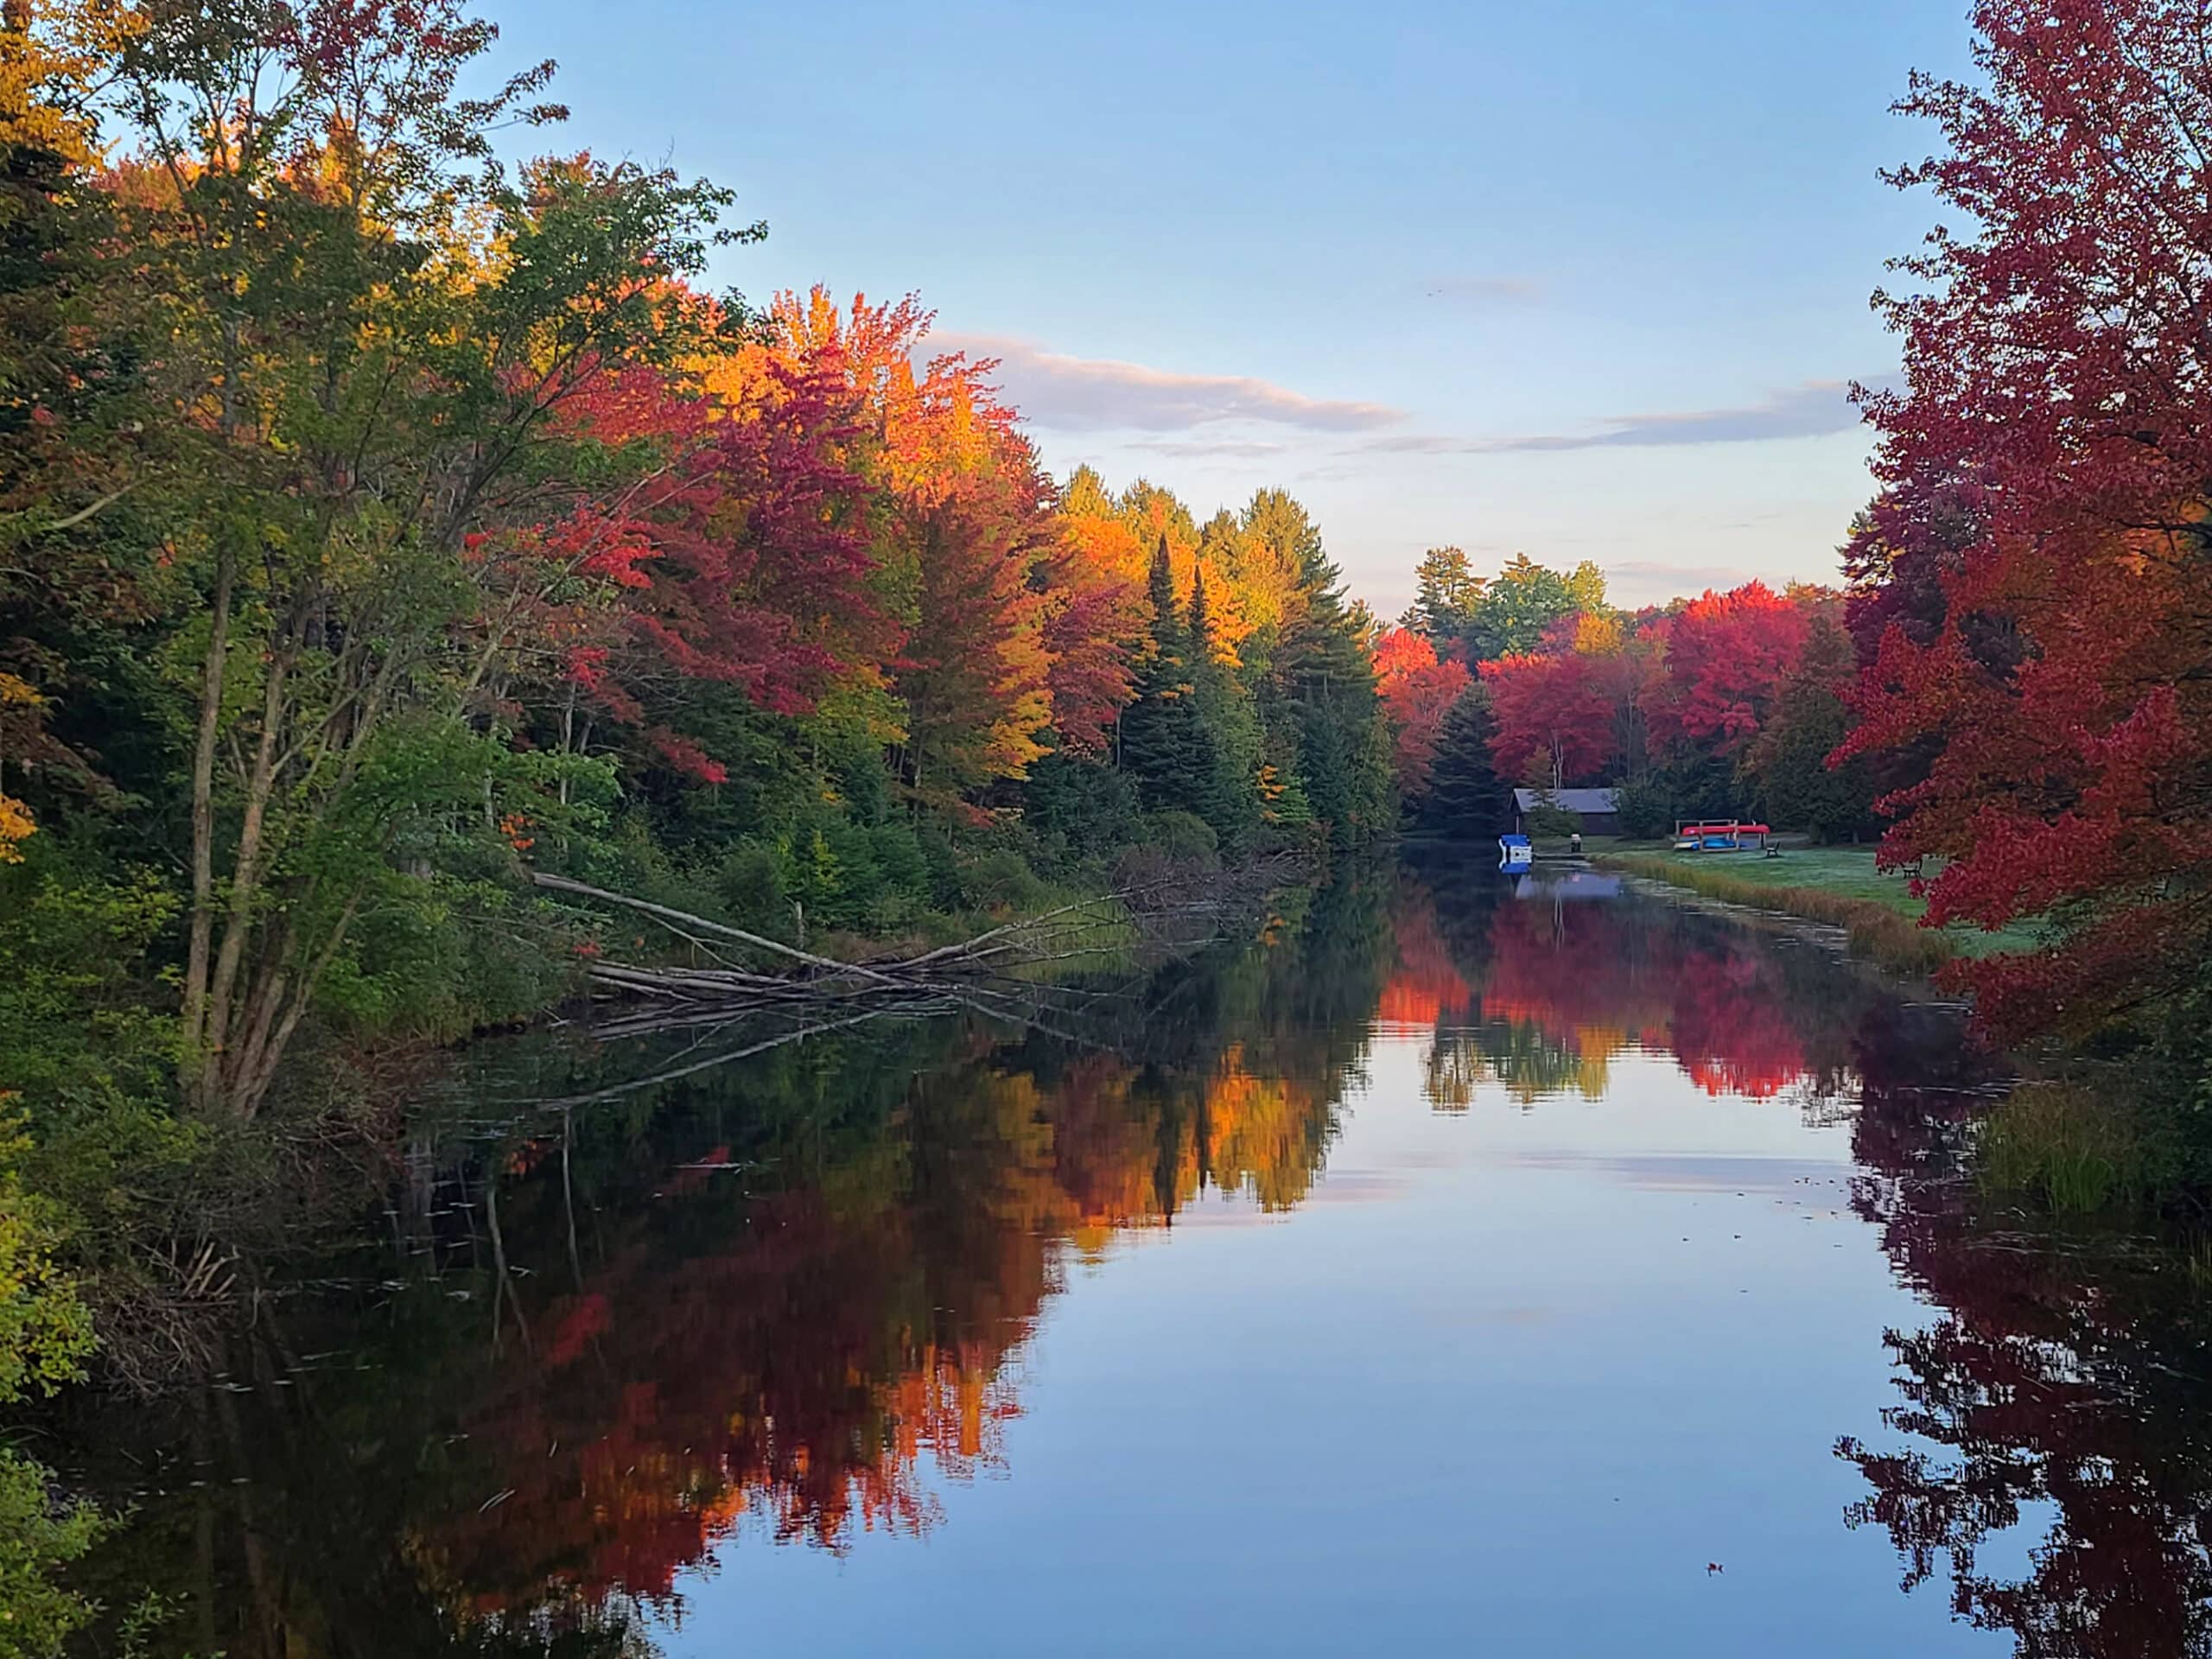 A line of colourful fall trees along a still creek, with reflections showing in the water.